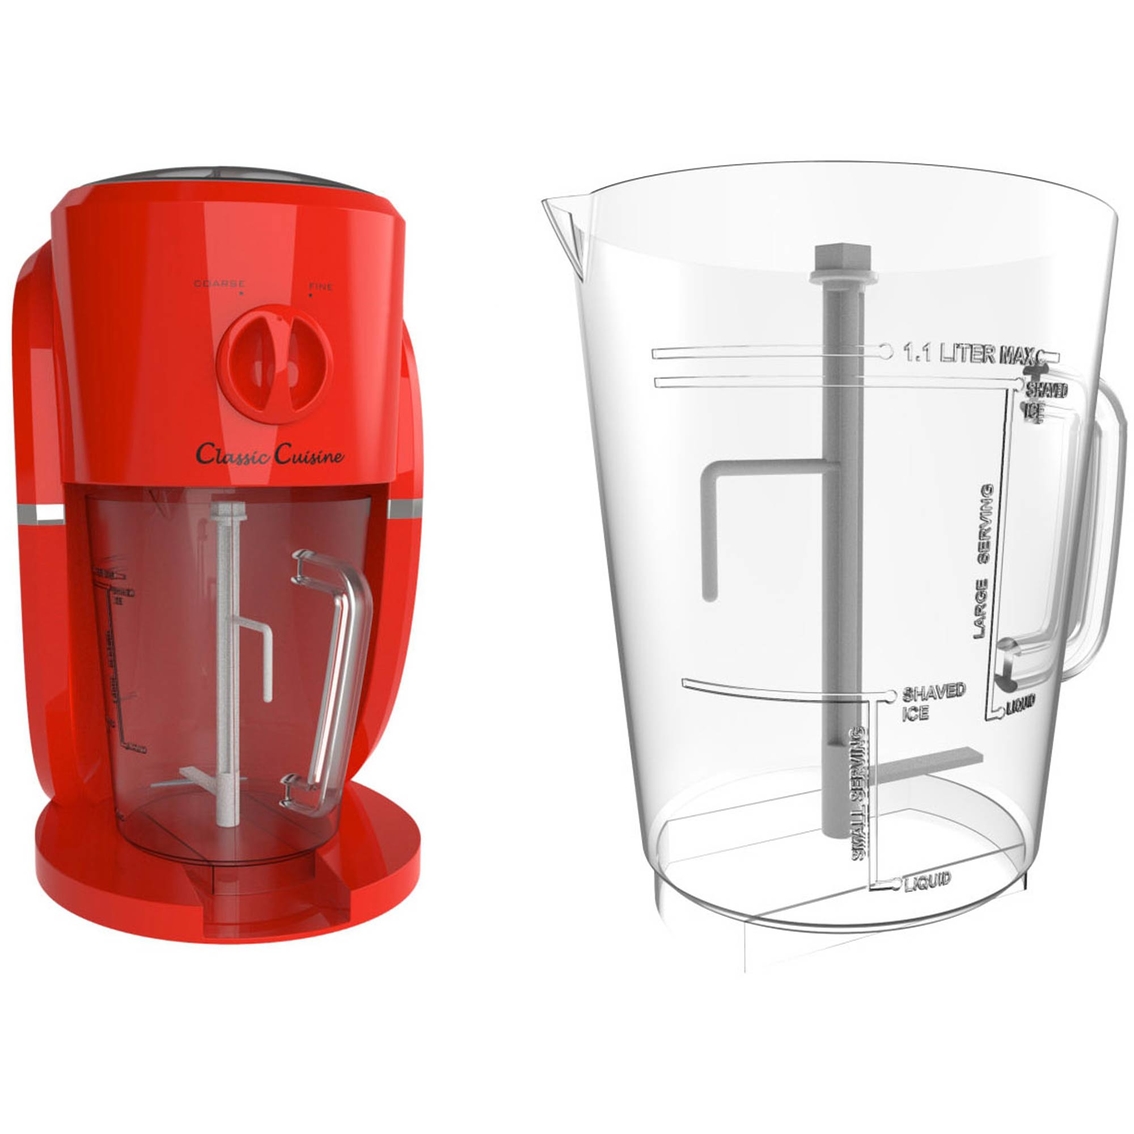 Classic Cuisine Frozen Drink Maker, Mixer and Ice Crusher Machine - Image 2 of 4